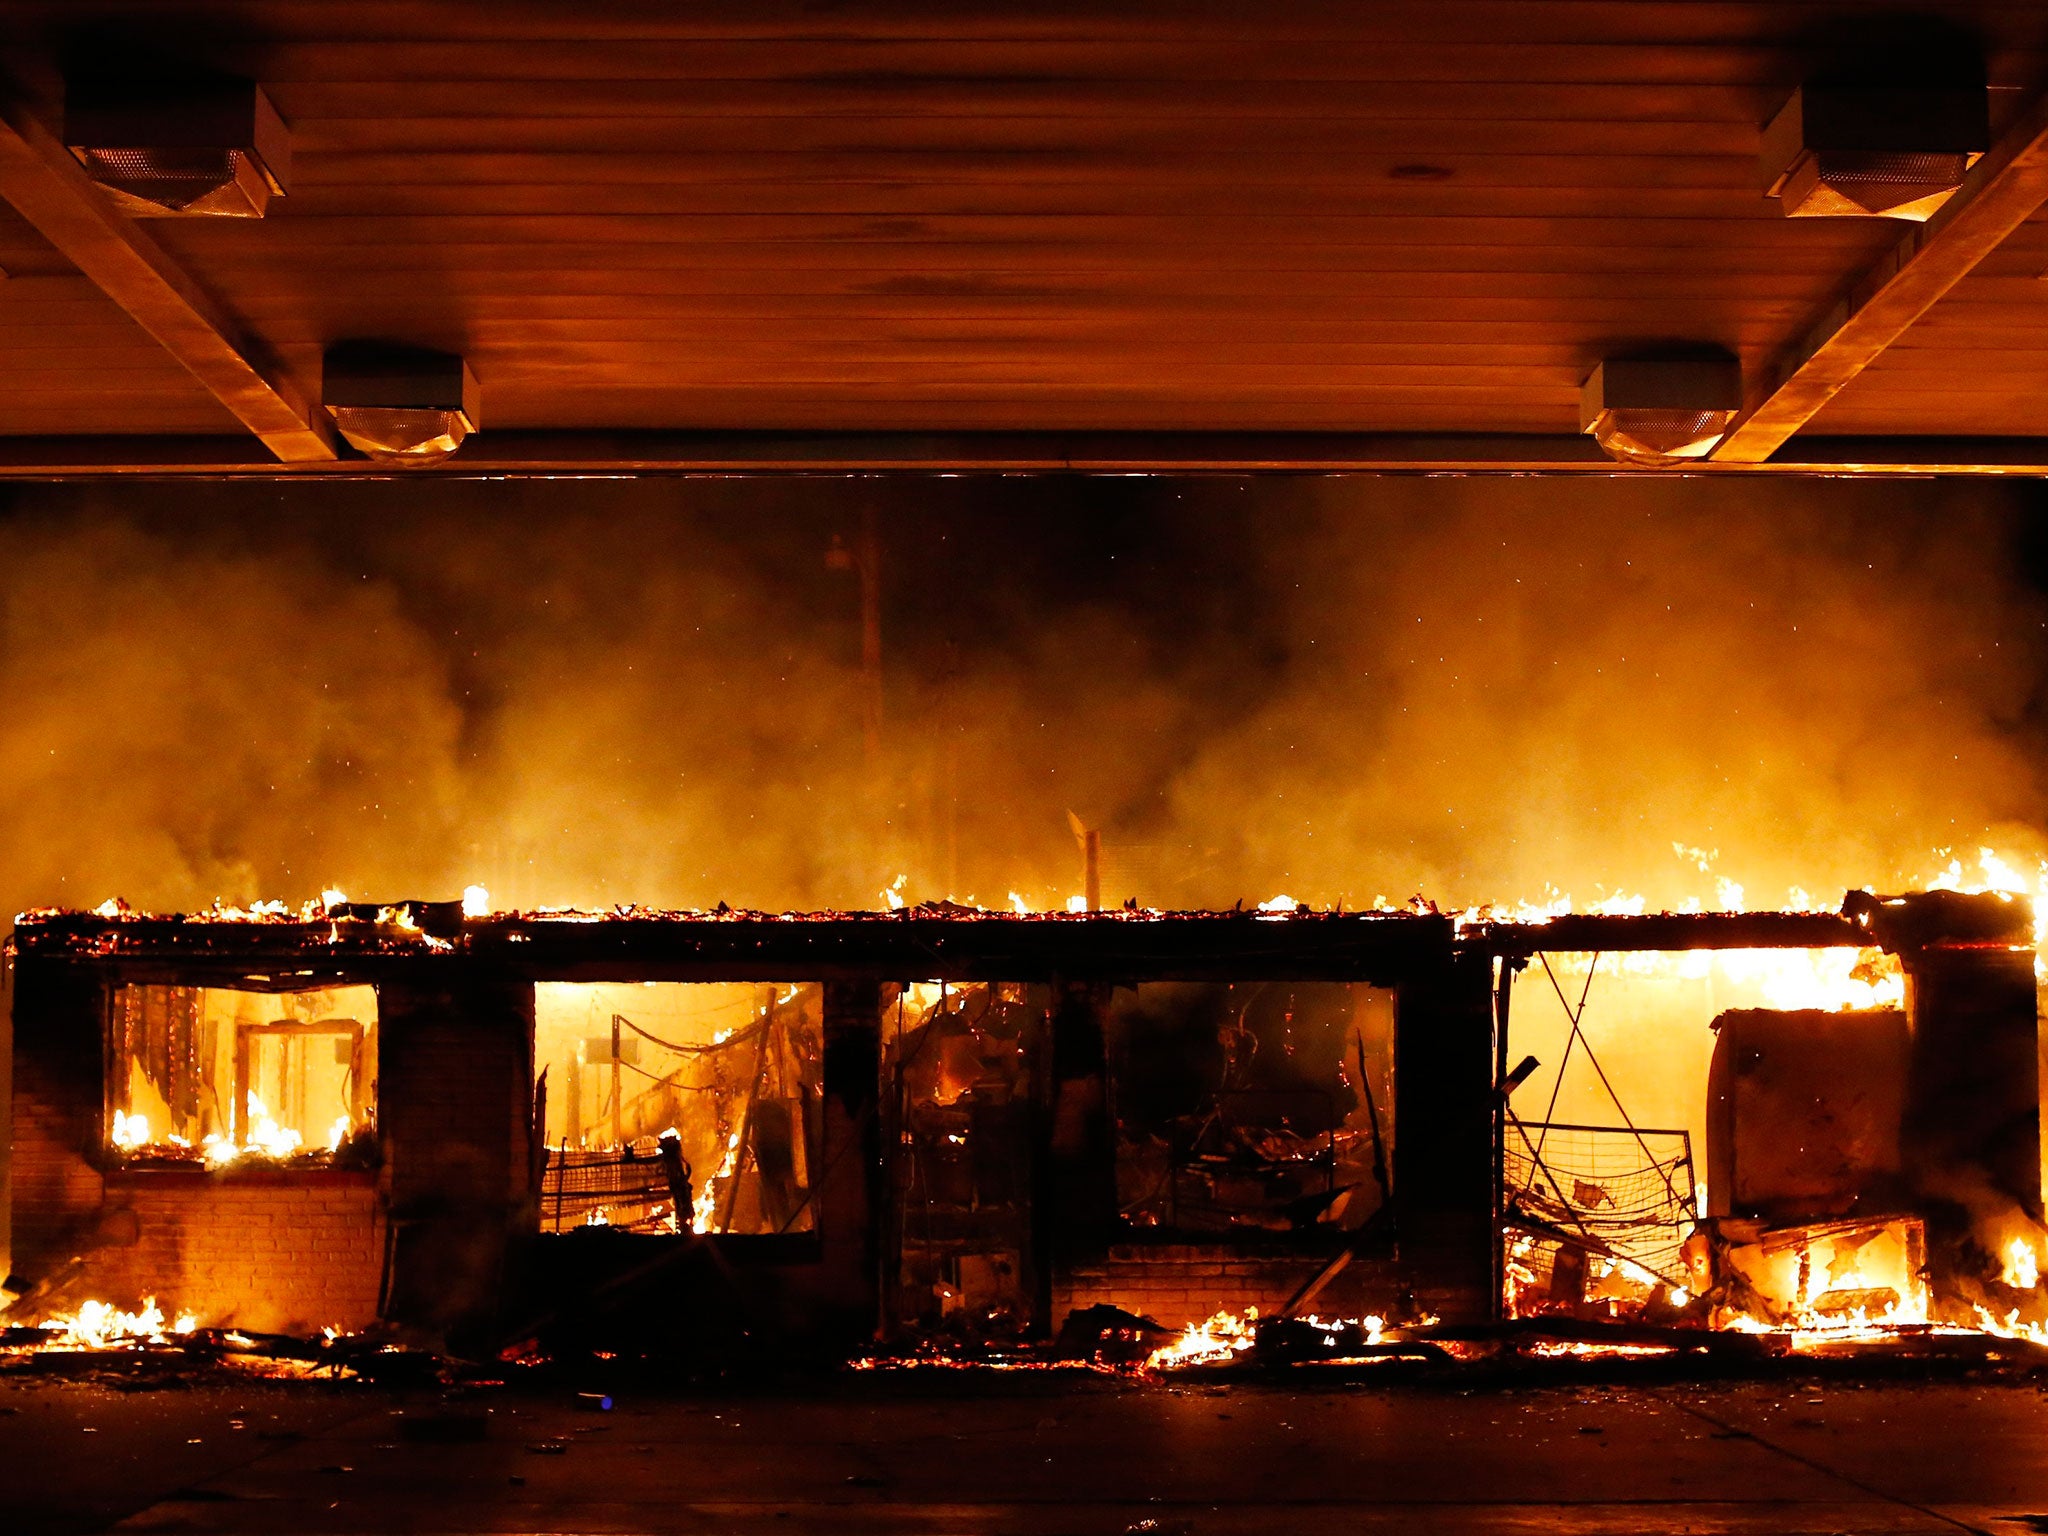 A gas station burns as demonstrators protest the Grand Jury decision not to indict police officer Darren Wilson over the shooting death of Michael Brown in Ferguson